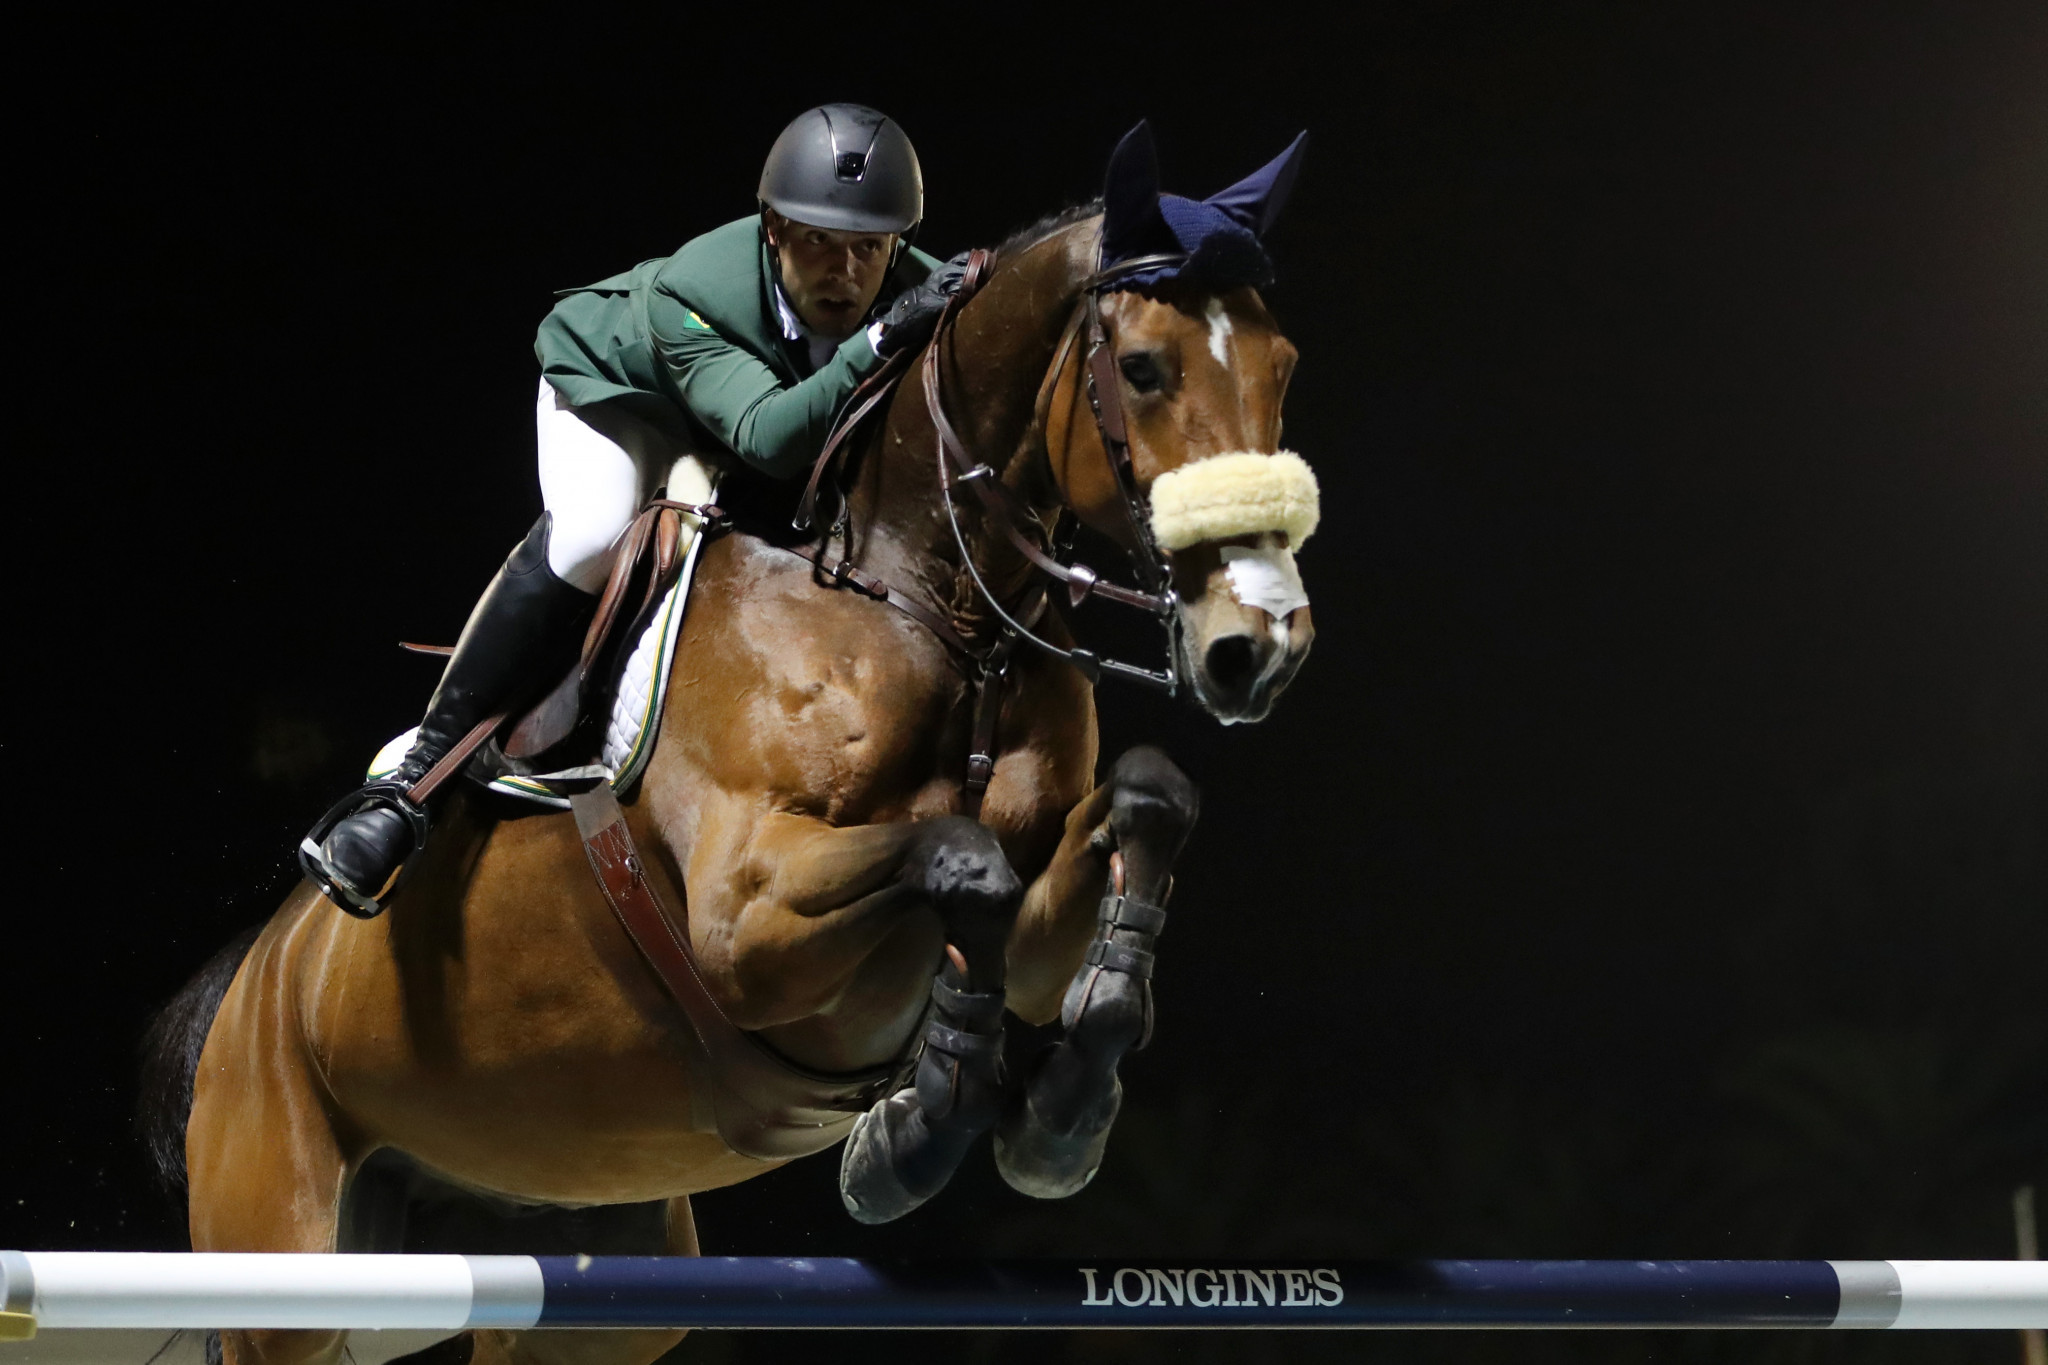 Brazil add artistic swimming and equestrian team titles at South American Games